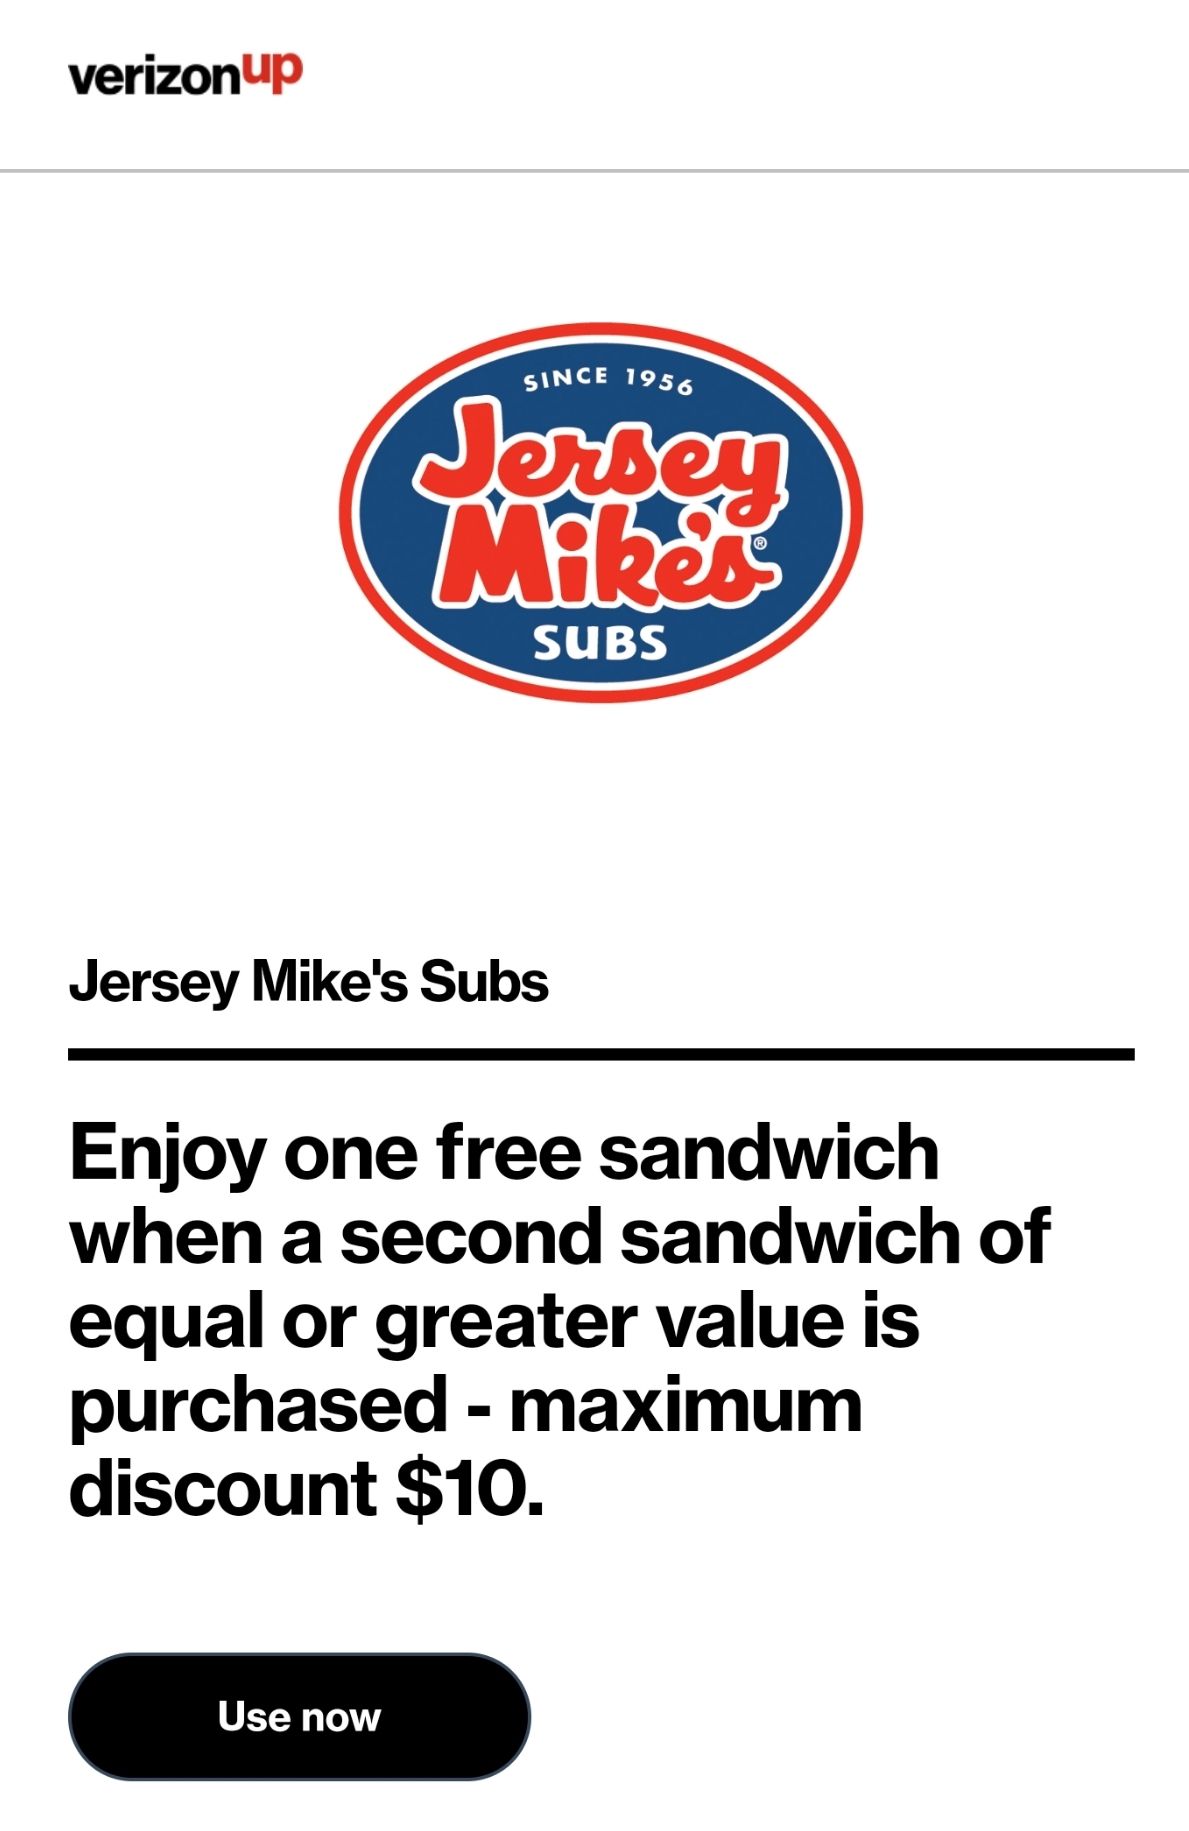 jersey mike's coupon bogo